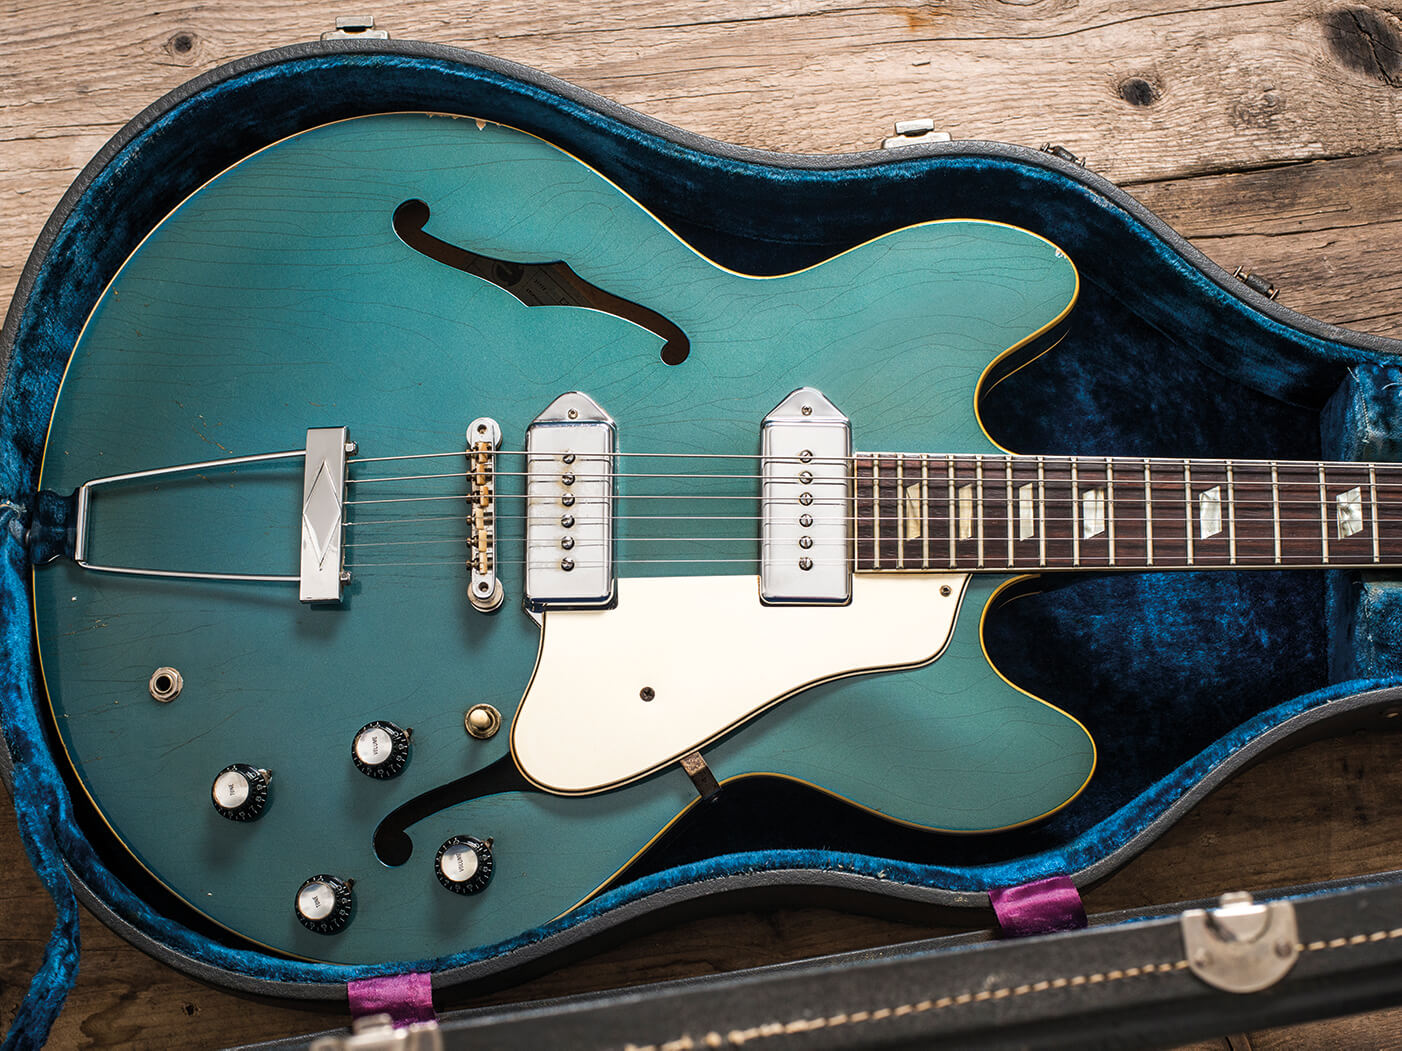 This 1967 Epiphone Casino comes in an ultra-rare Pelham Blue finish